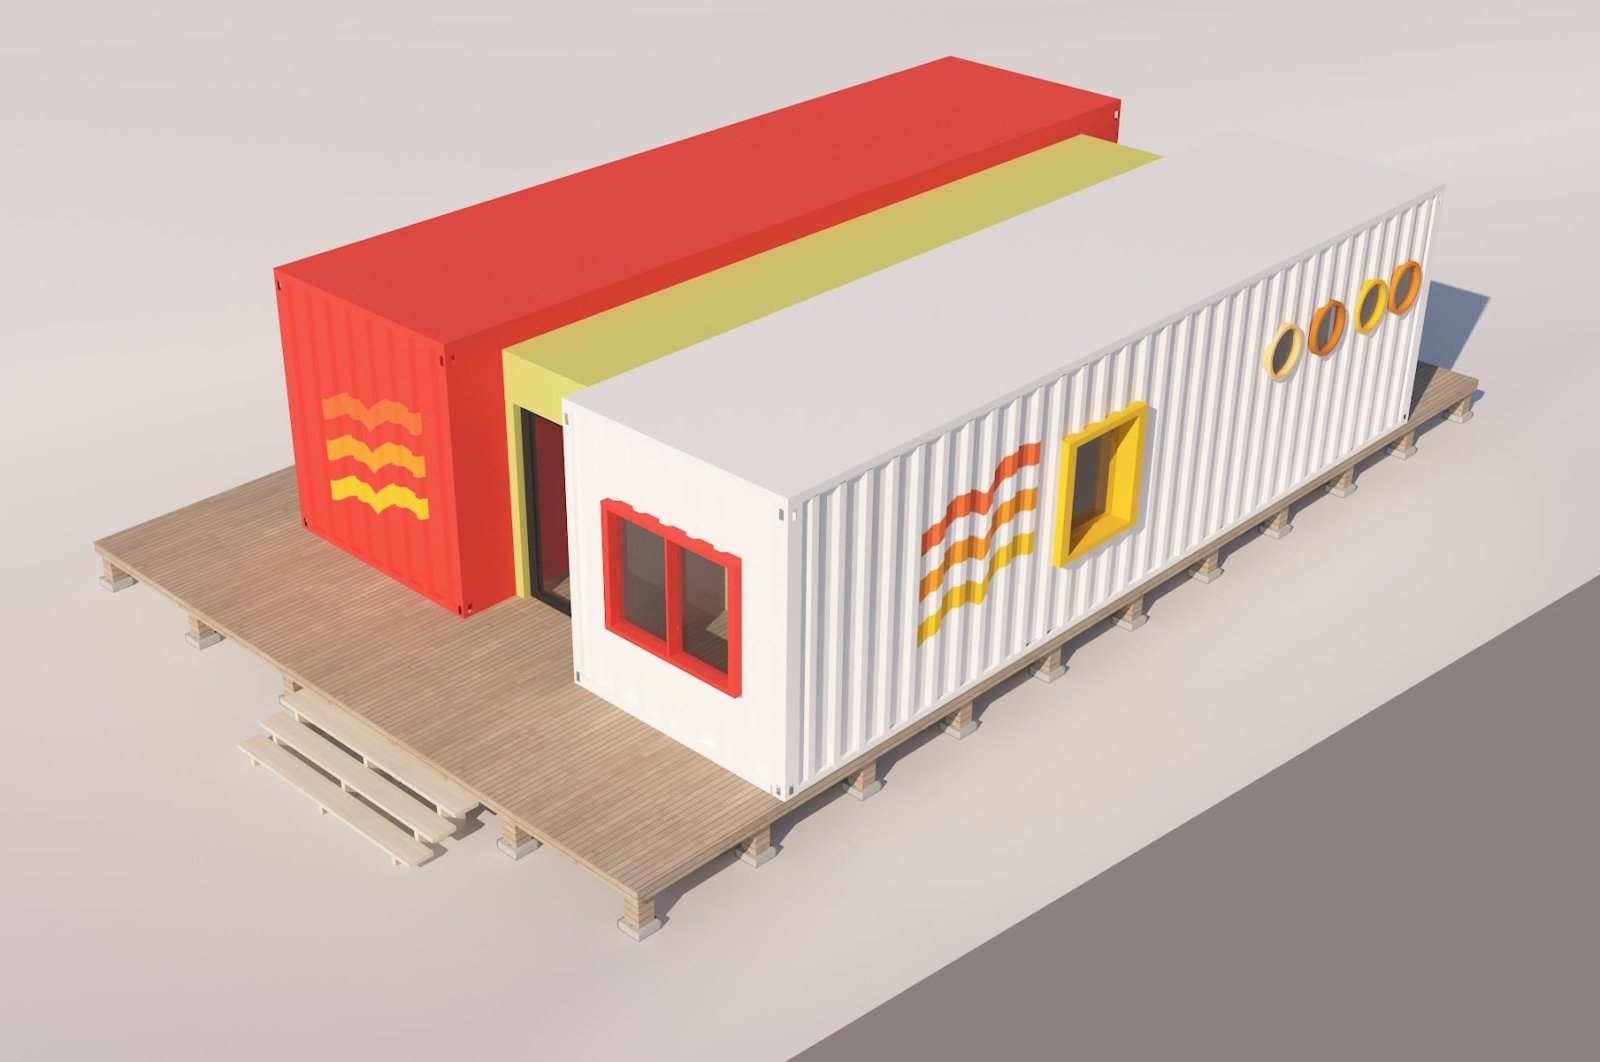 An example of a container center to be built for children&#039;s services in Türkiye&#039;s quake zone. (Courtesy of Suna&#039;nın Kızları)